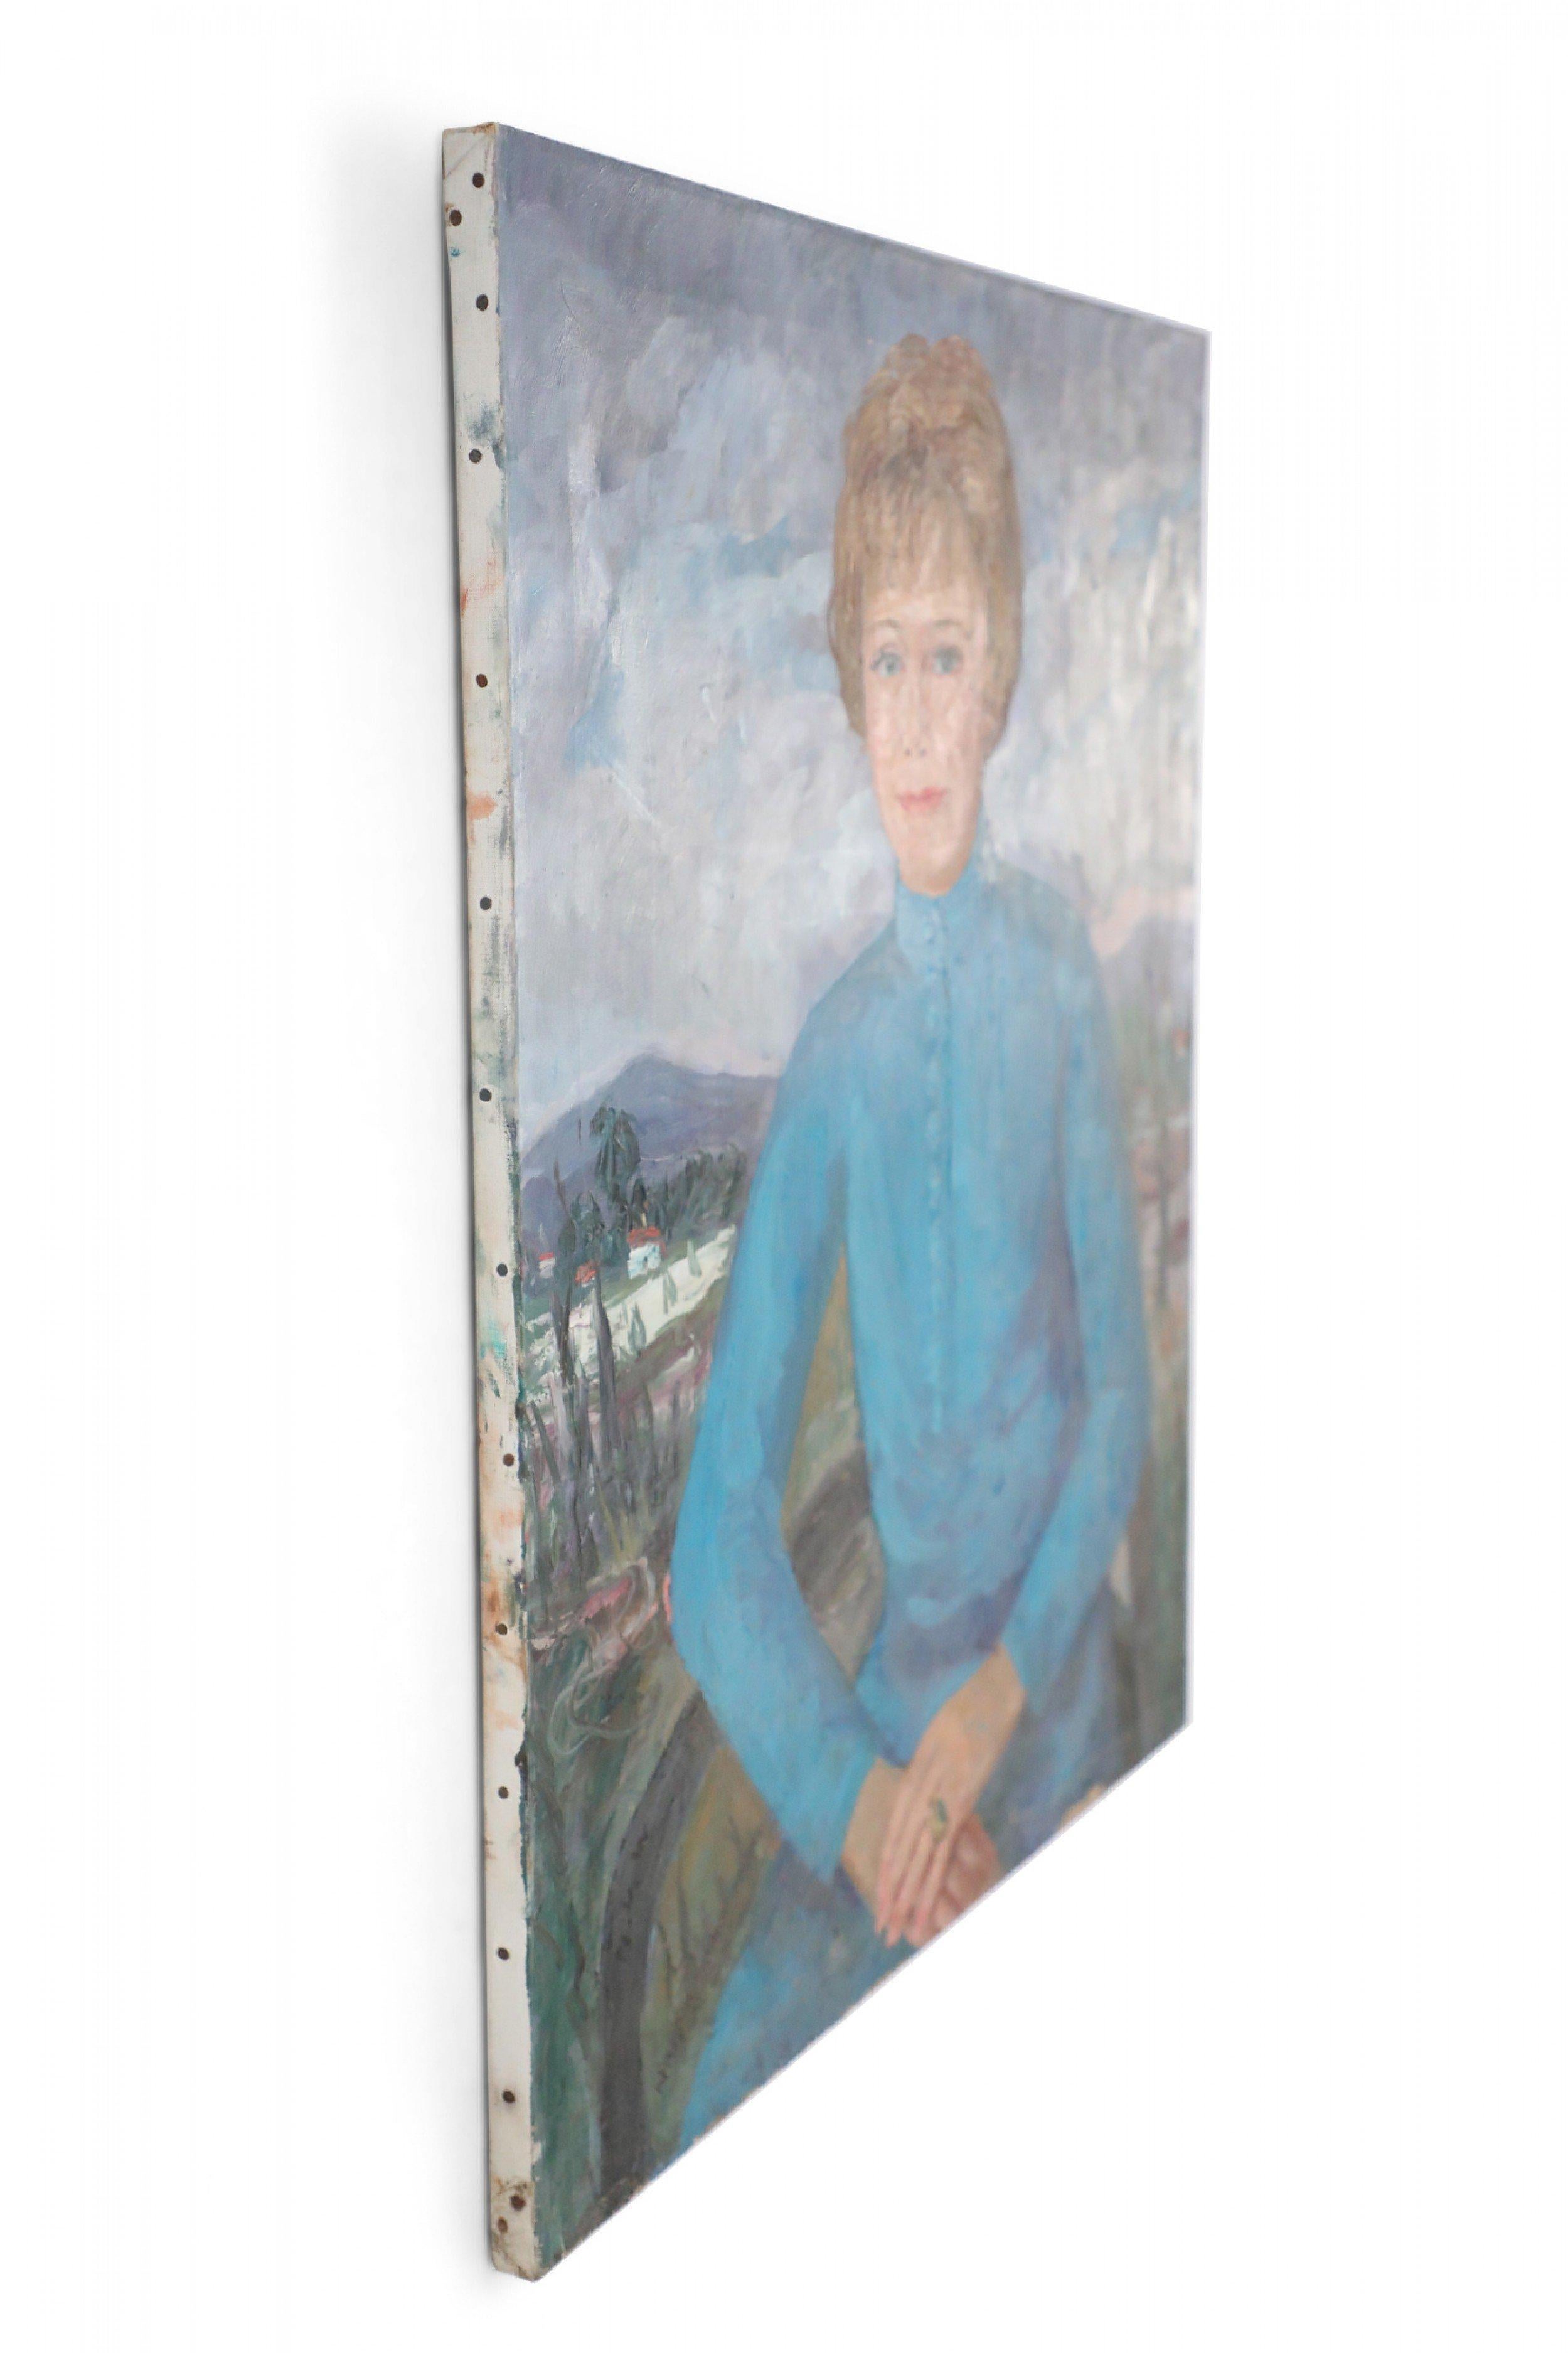 American Portrait of a Woman in a Blue Dress Painting on Canvas For Sale